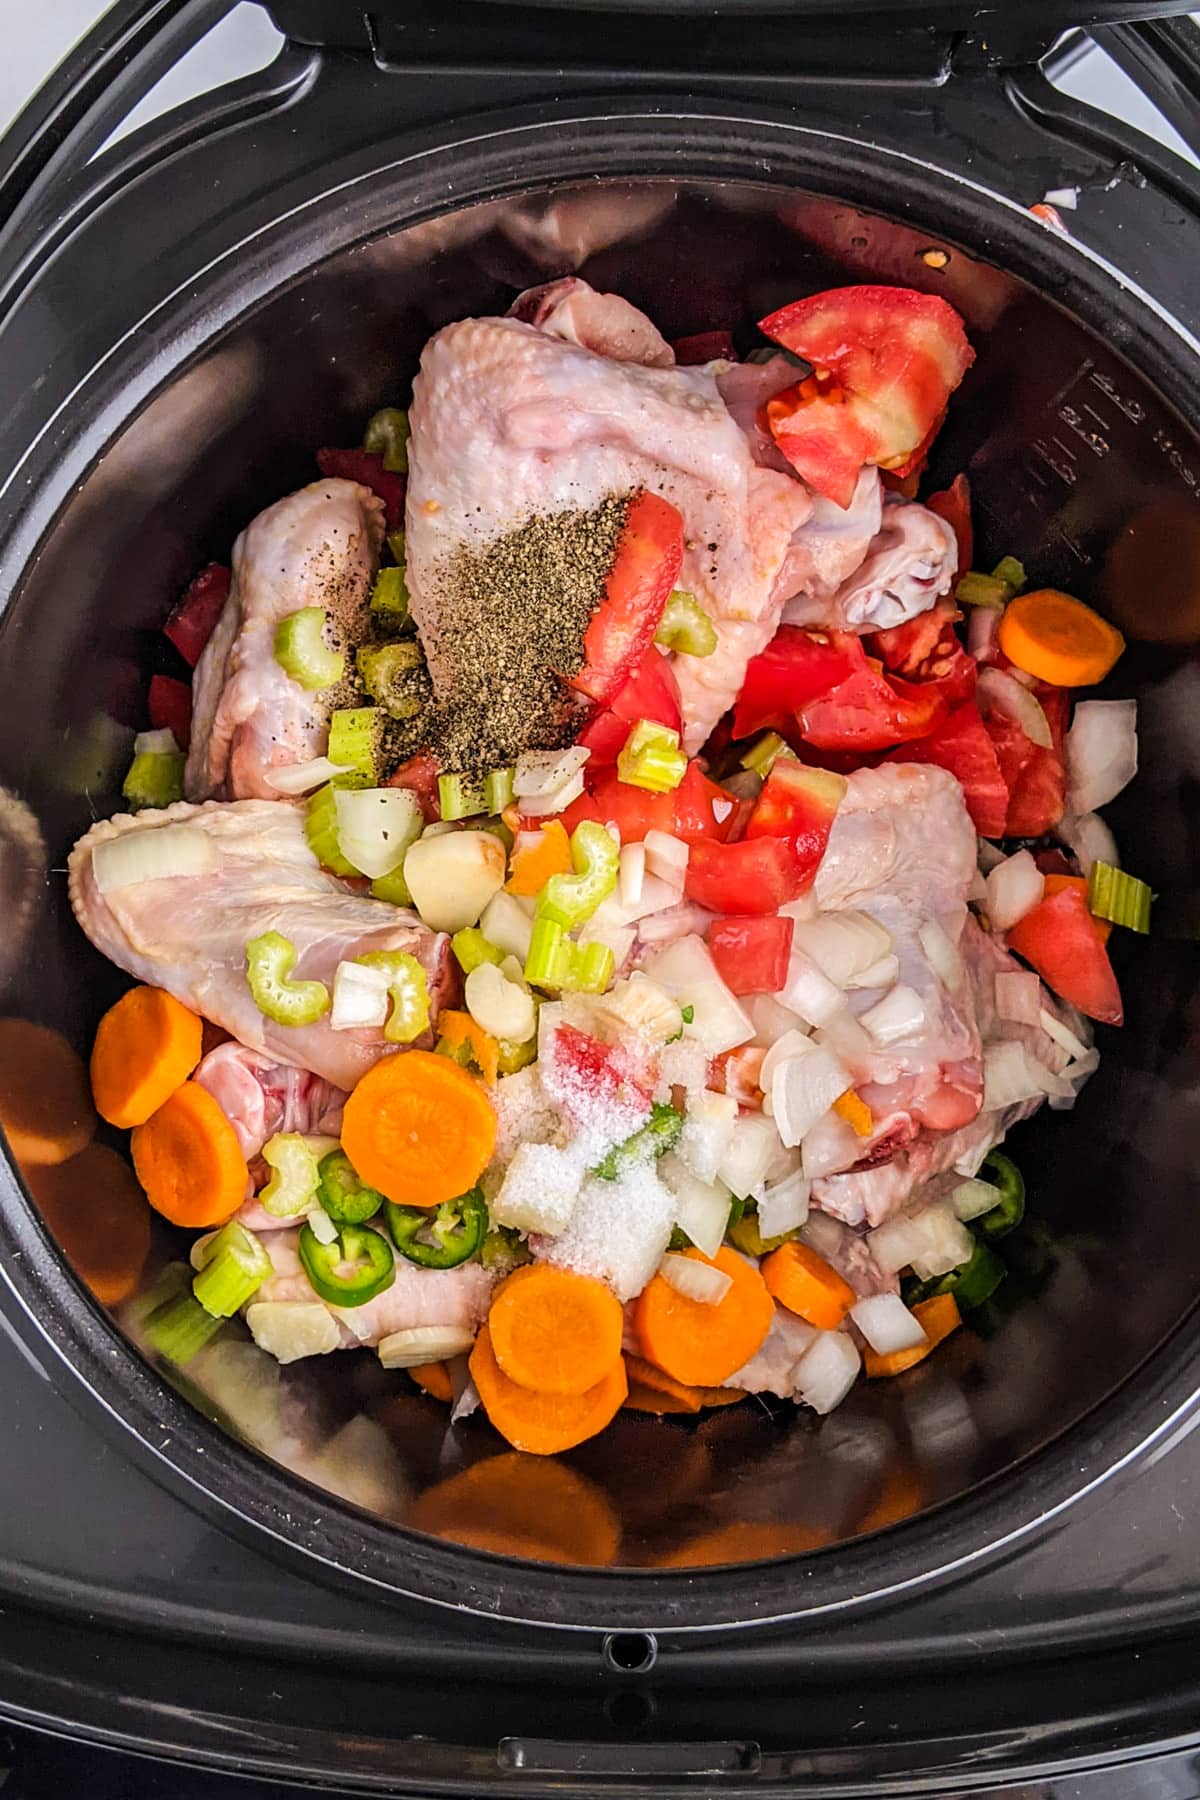 Slow cooker tray with chicken wings, with cubes of different vegetables and spices over them.